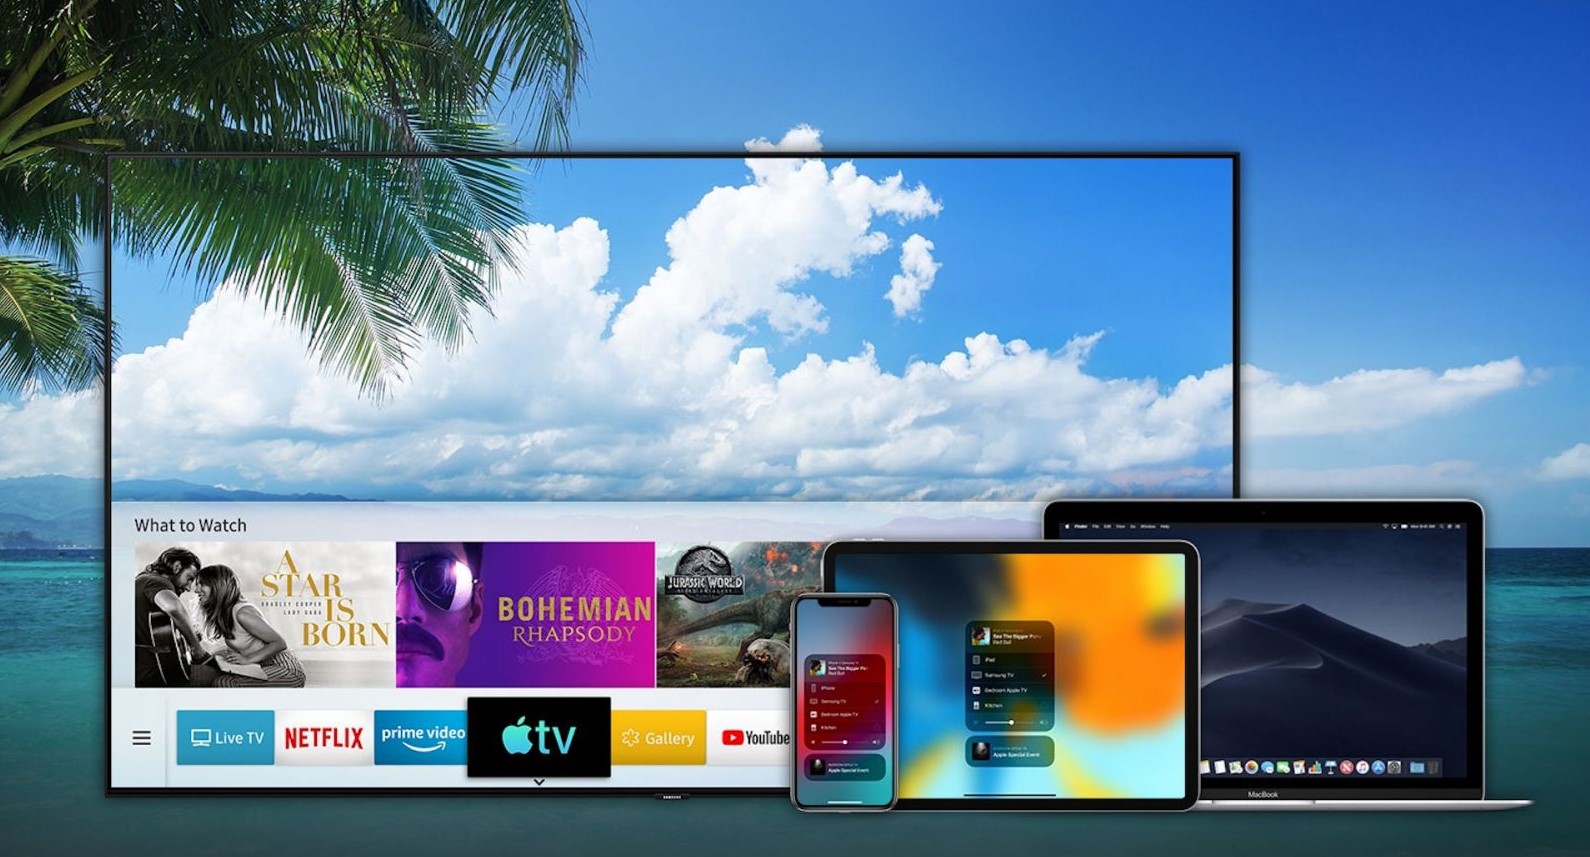 How to Cast from Mac to Samsung Smart TV